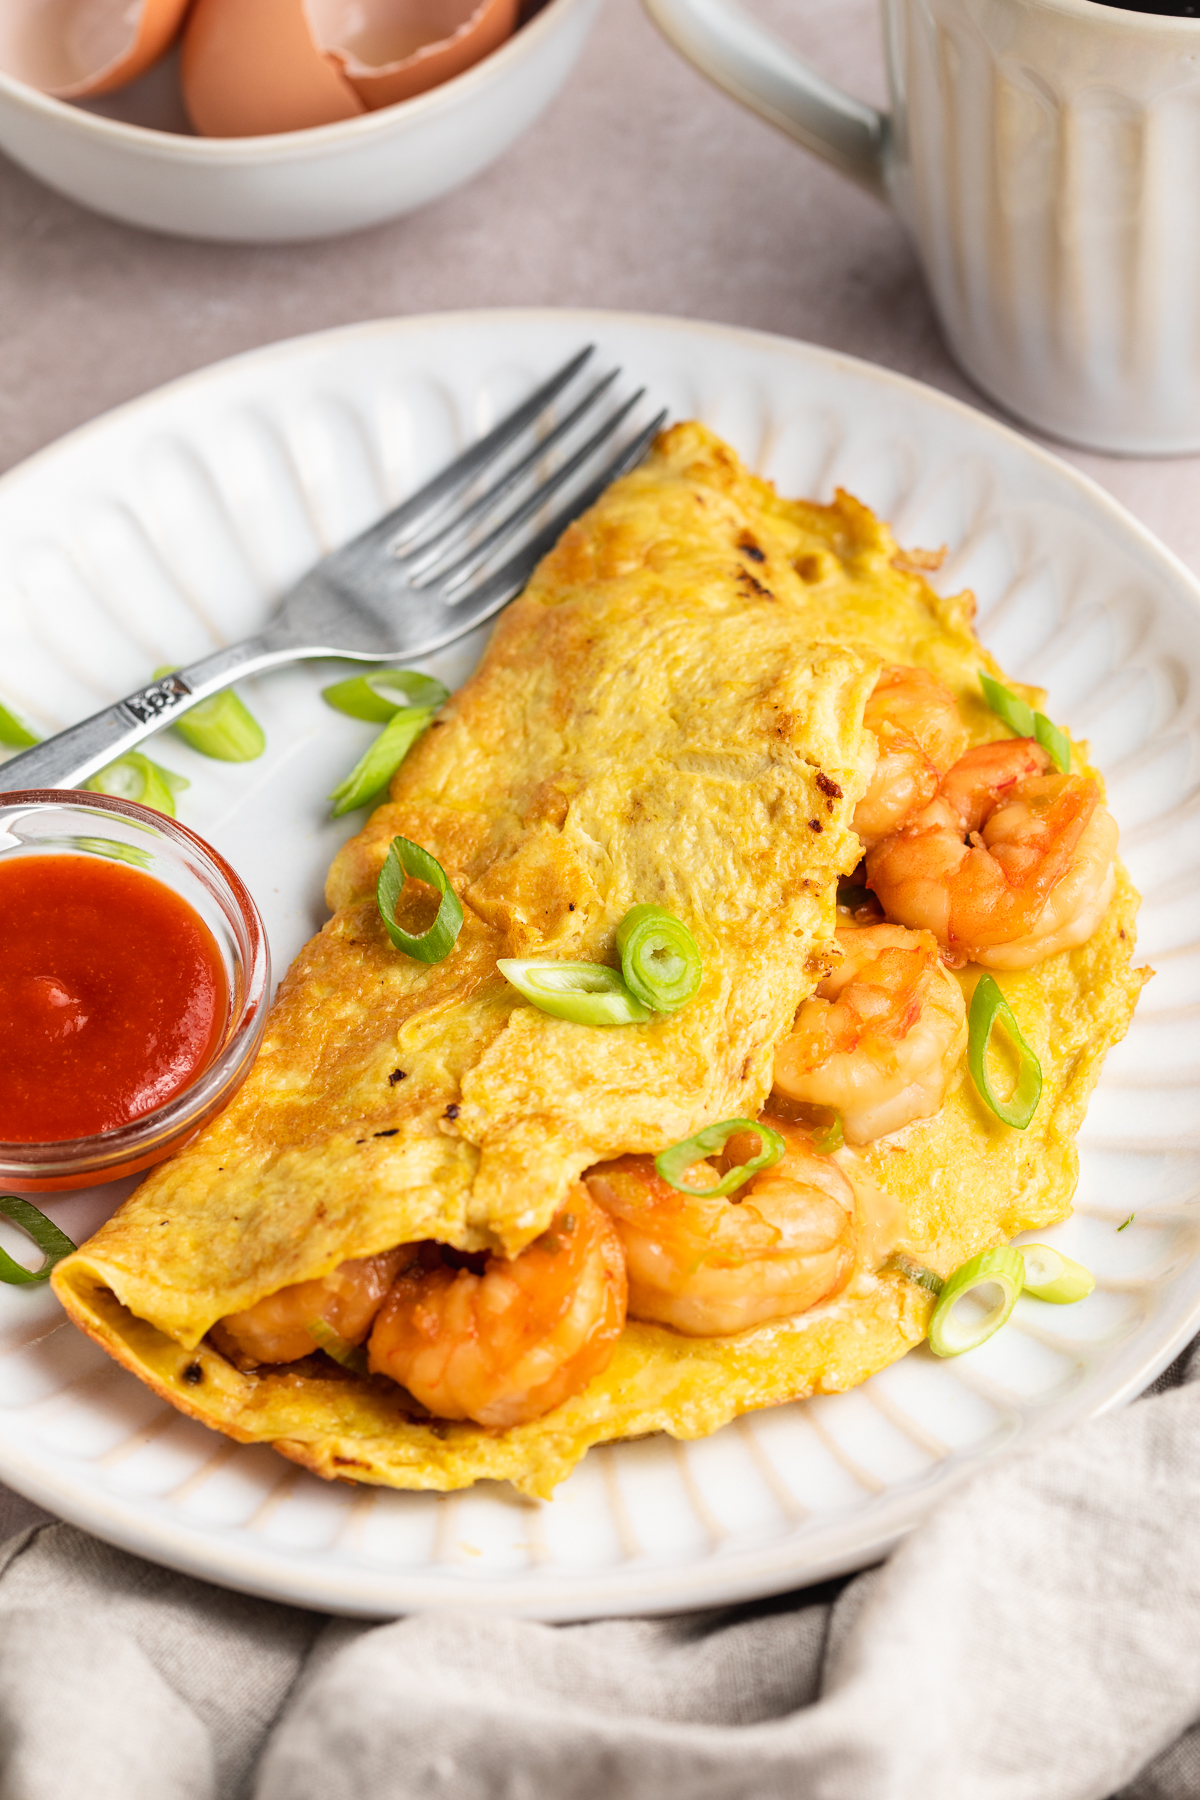 3/4-angle view of a folded omelette stuffed full with tender shrimp on a white plate next to a small bowl of ketchup.